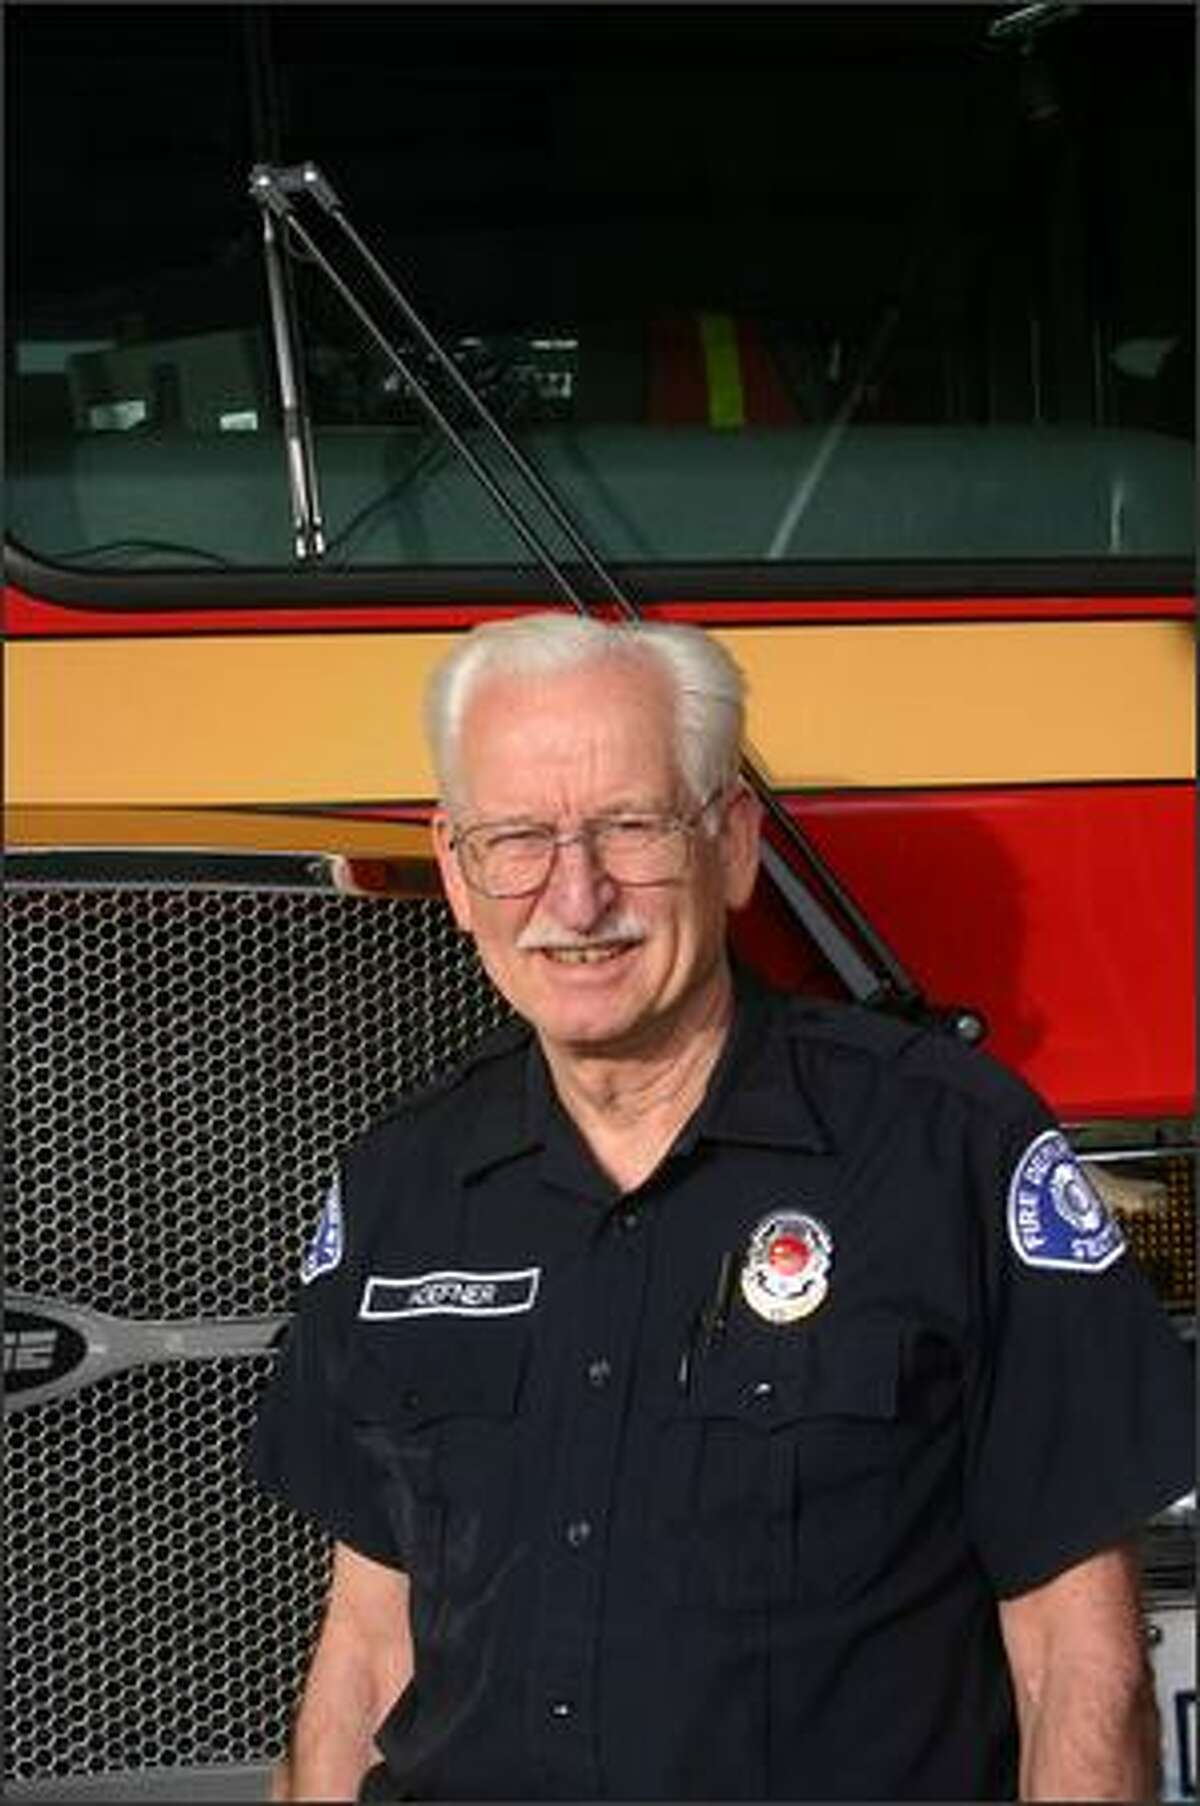 Ken Hoefner, at age 70 the Seattle Fire Department's oldest firefighter, says, "This is a job like no other, and I still look forward to every shift."